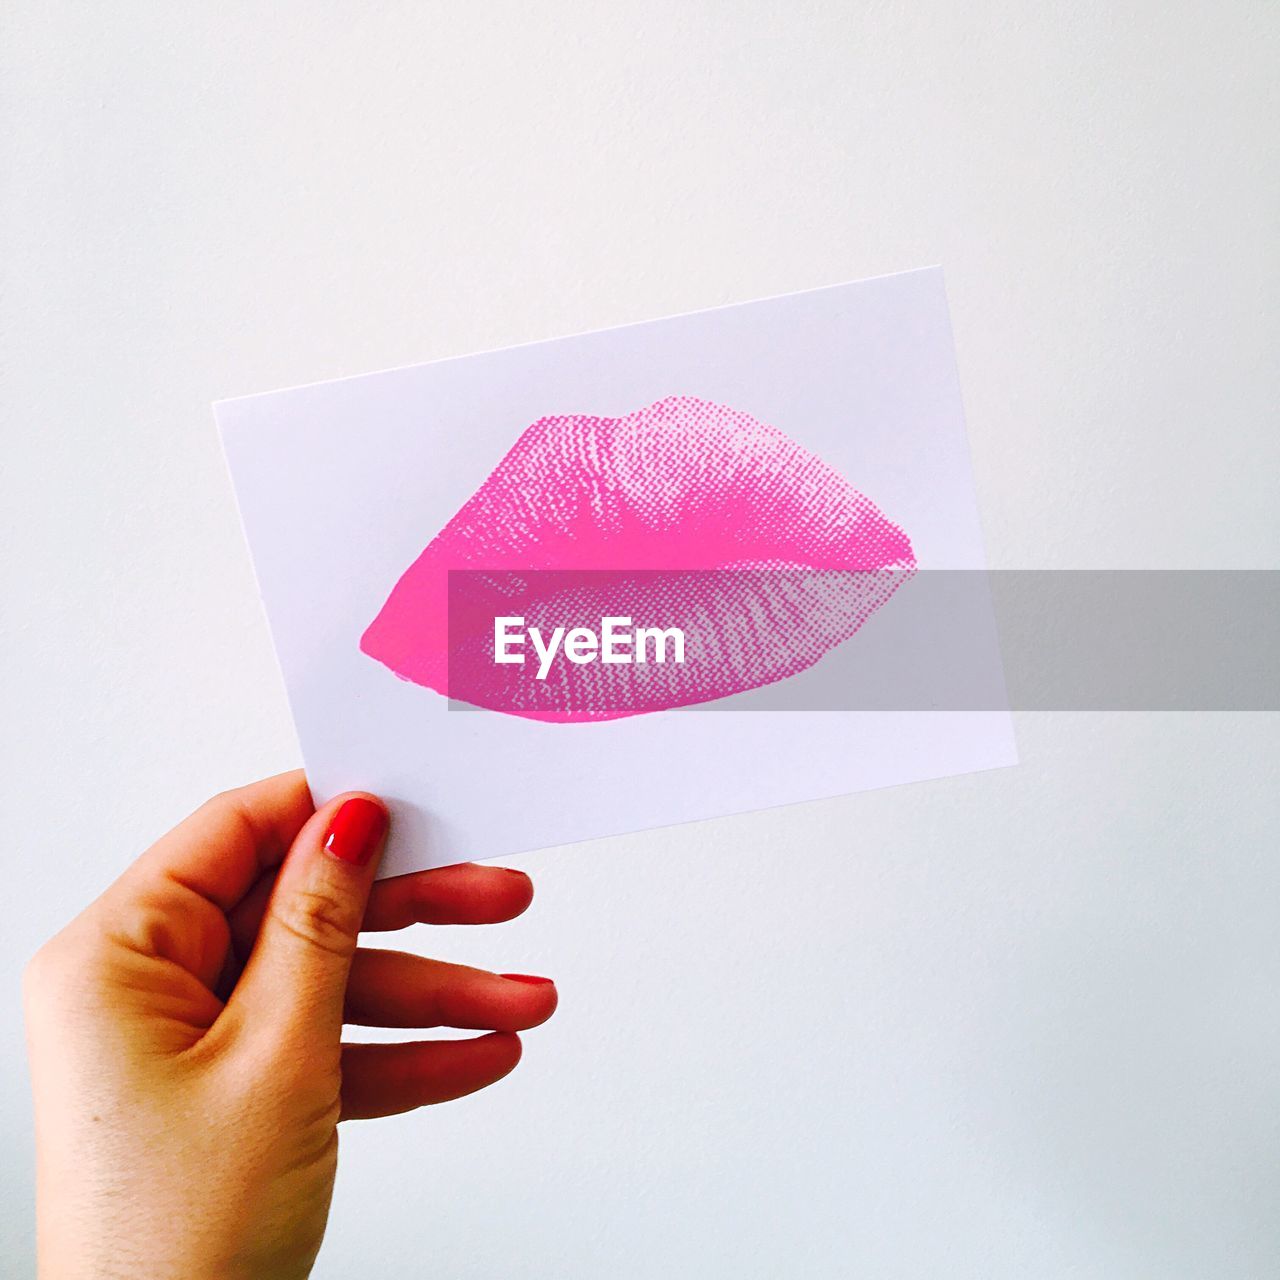 Close-up of hand holding paper with lipstick kiss against white background